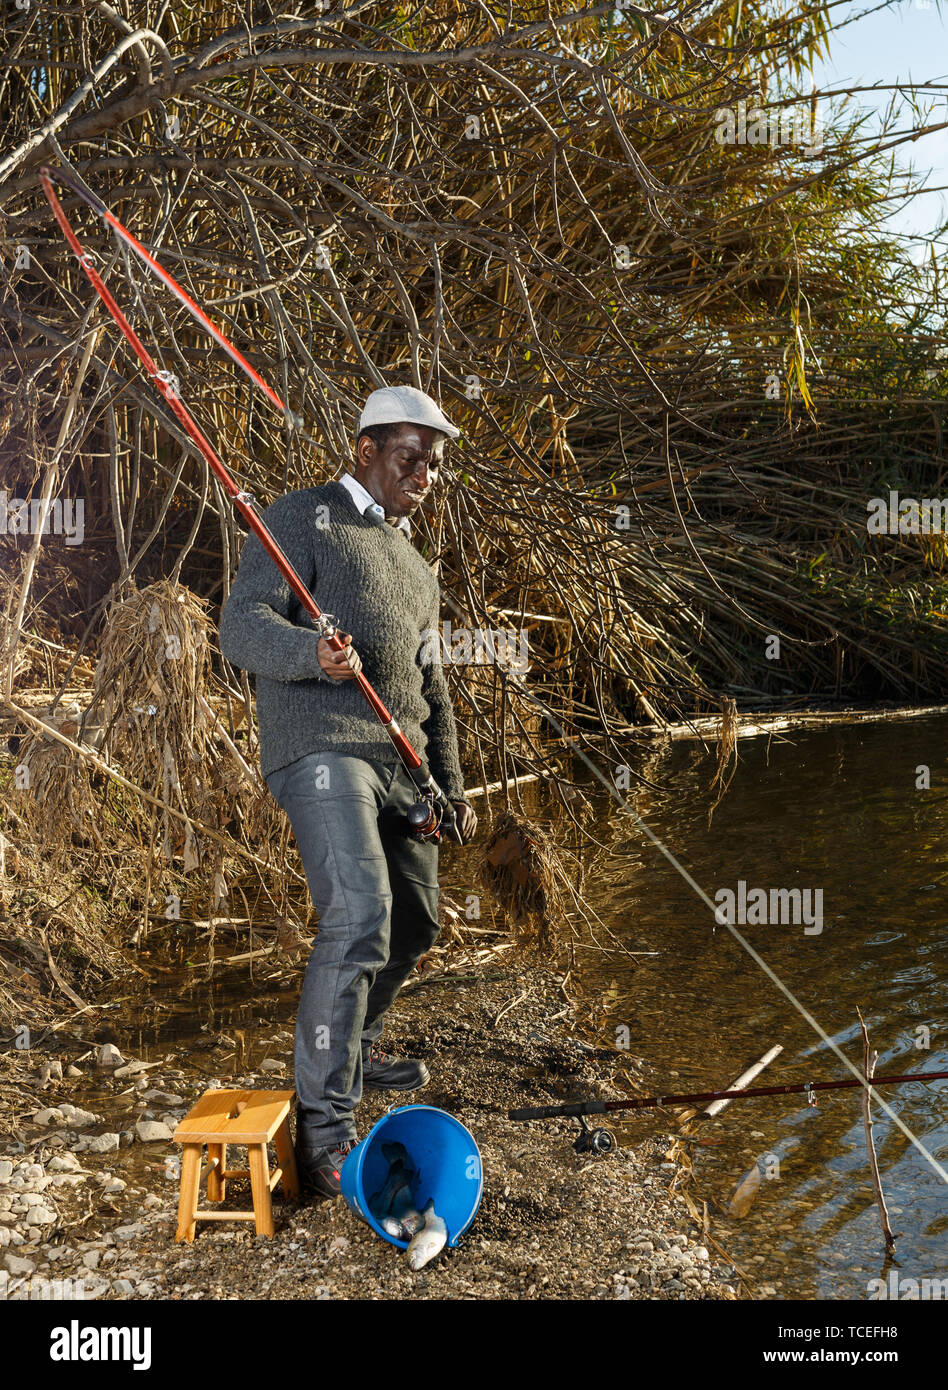 Emotional portrait of African man pulling with rod fish on river Stock Photo